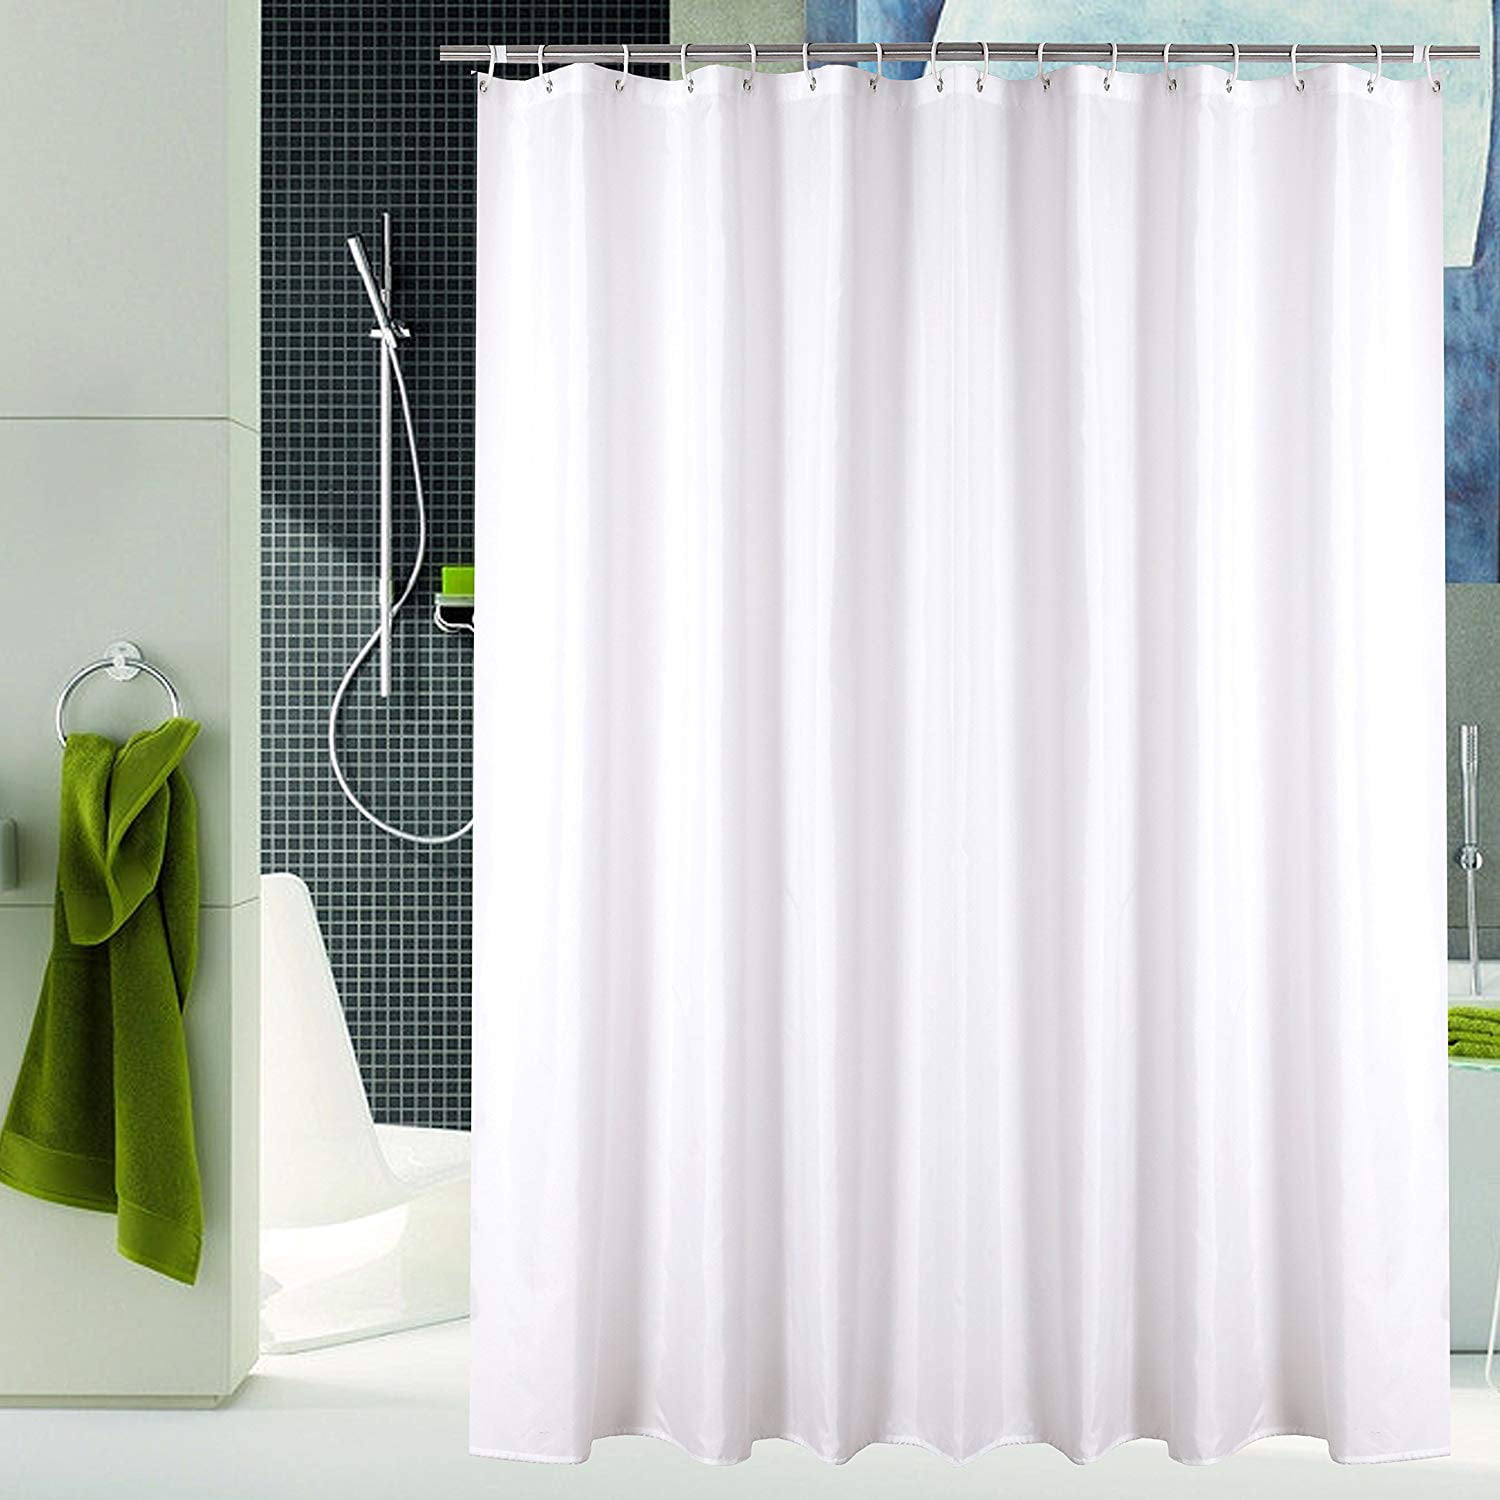 Washable Polyester Shower Curtain With Hook Water Repellent Mildew Resistant 